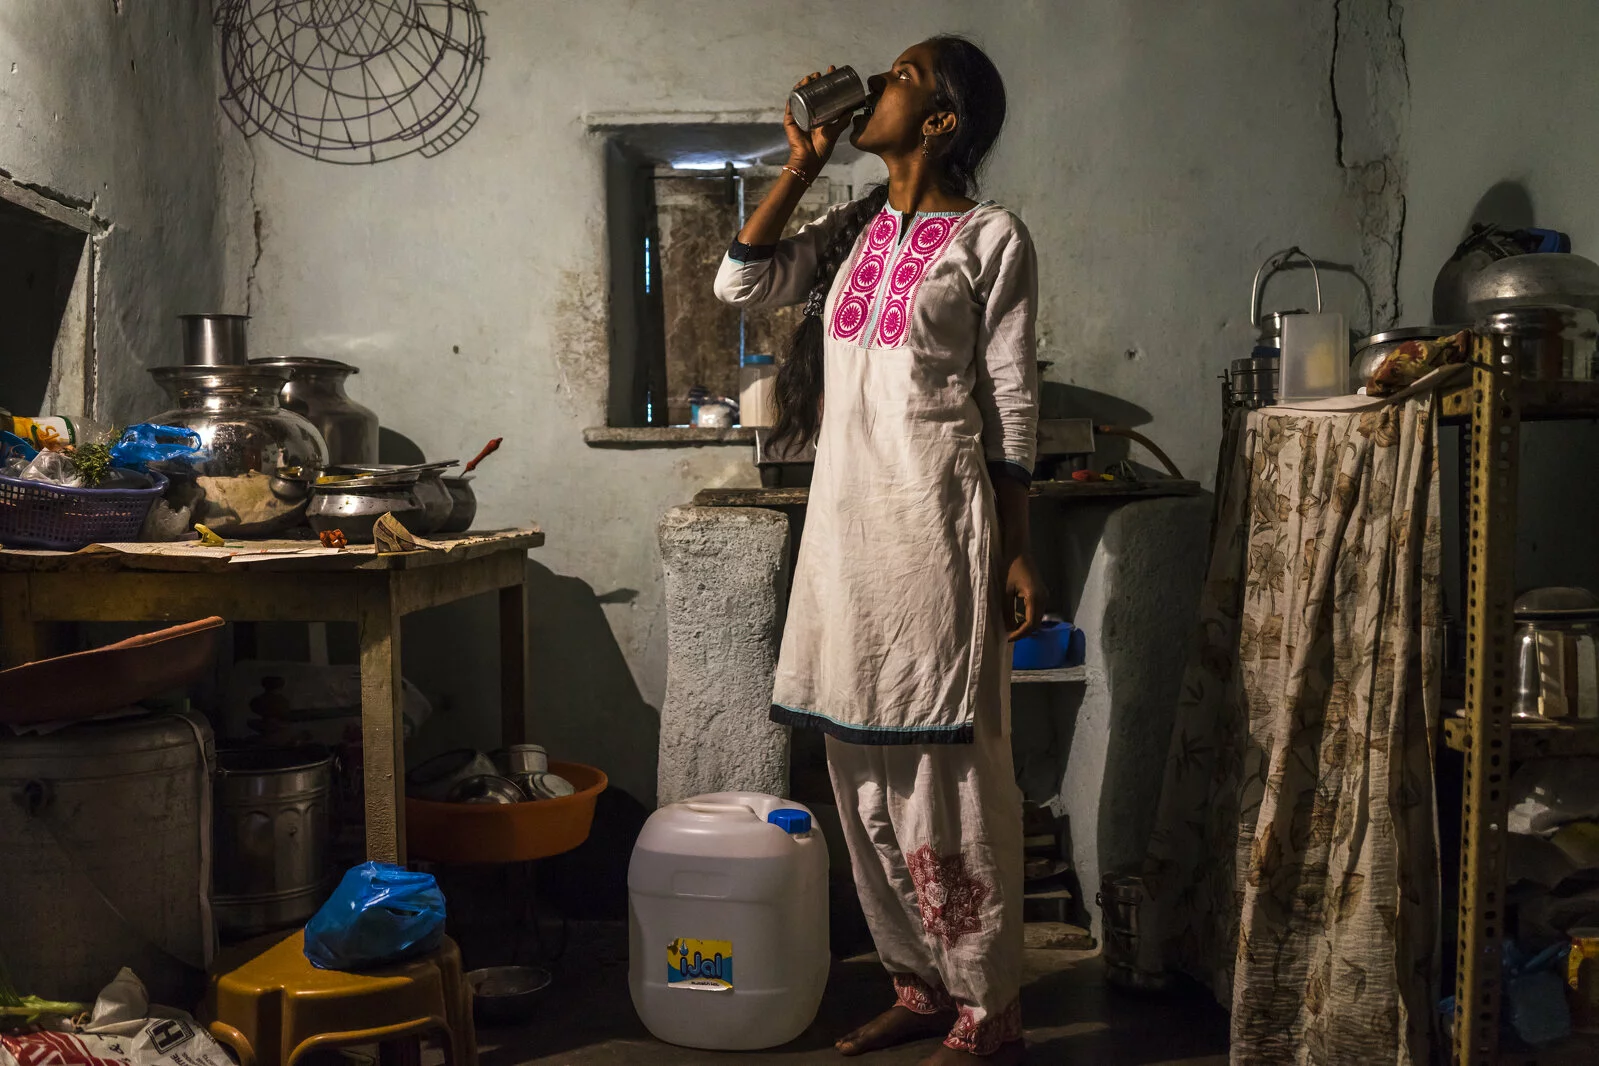 Cheekata  Srujana, 18, drinks a cup of water as she waits for a meal to cook in her kitchen in Peddapur, a remote village in Warangal, Telangana, India, on 22nd March 2015. Cheekata only uses safe water for all her cooking and drinking needs of the family. Photo by Suzanne Lee/Panos Pictures for Safe Water Network 2023/08/Photo-3.jpg 